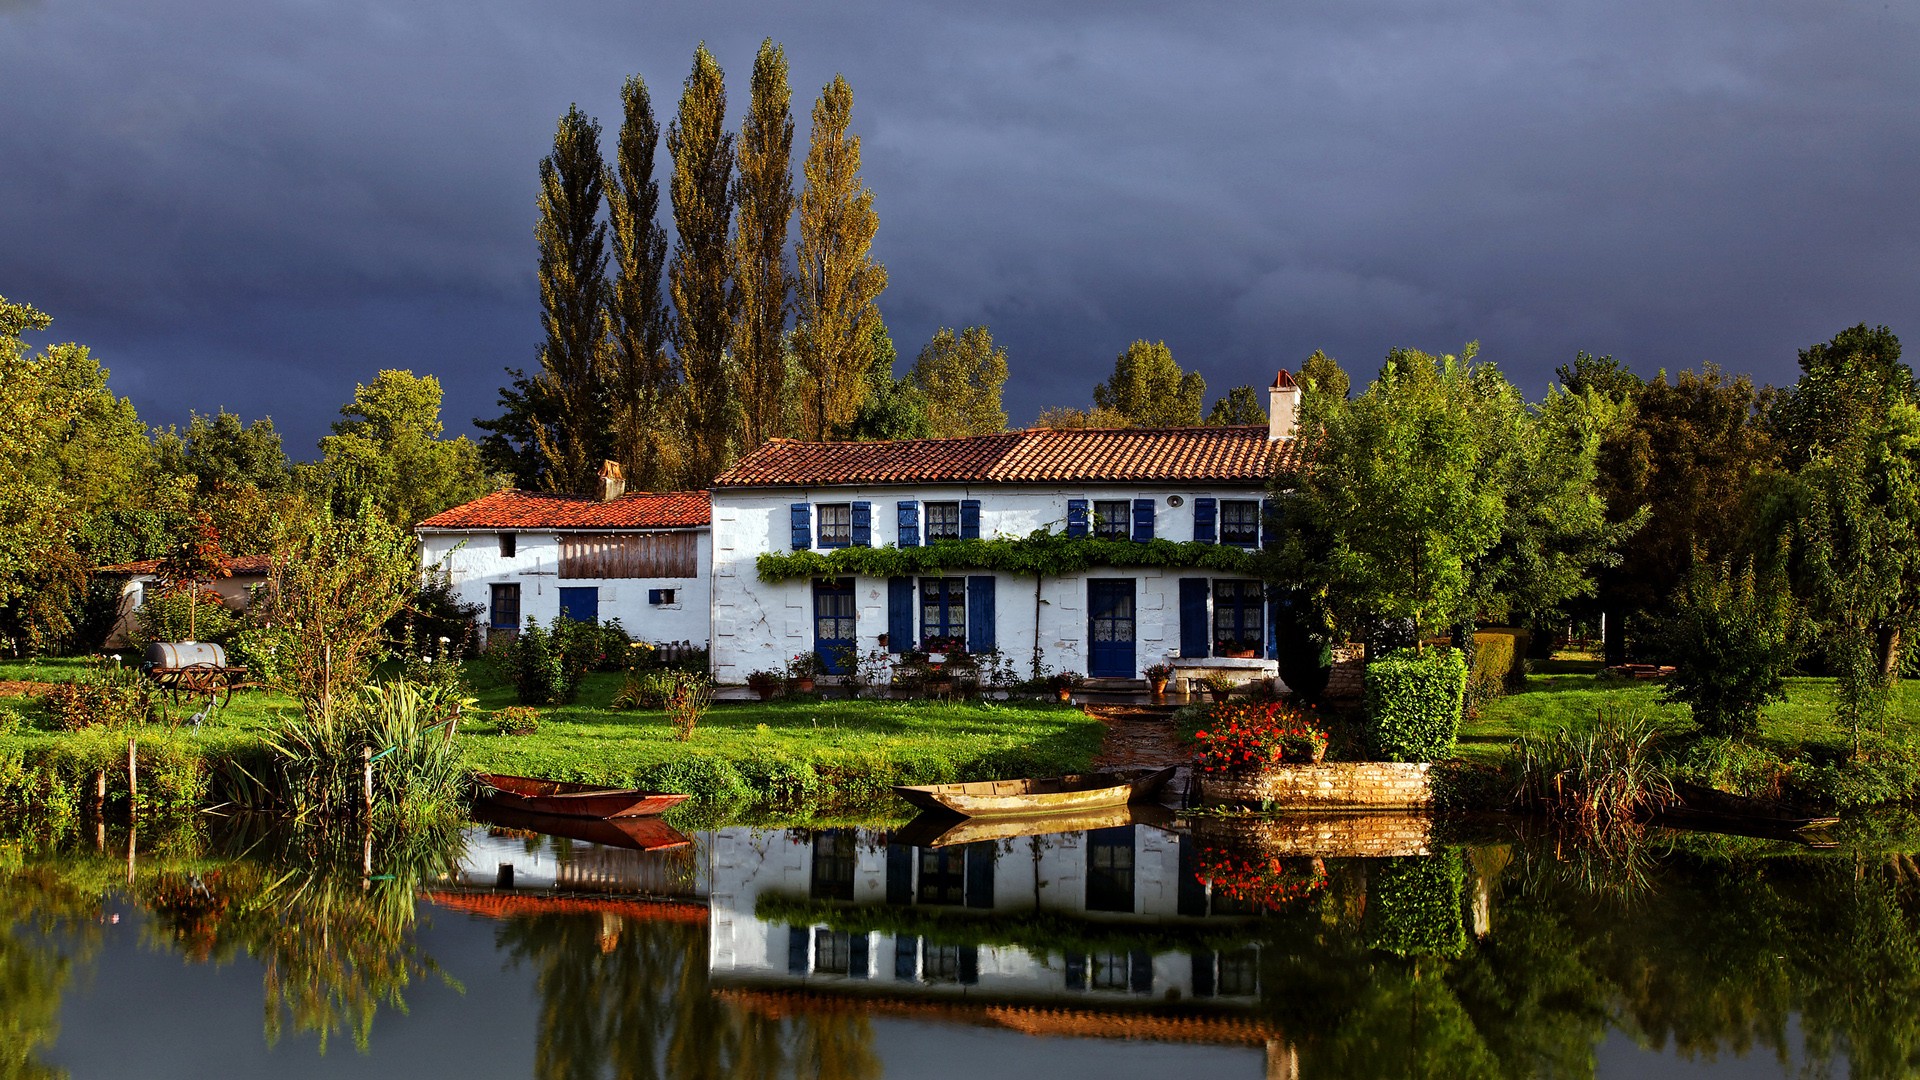 Wallpaper, landscape, lake, nature, reflection, house, village, river, France, estate, tree, autumn, flower, home, mansion, rural area, waterway, residential area 1920x1080